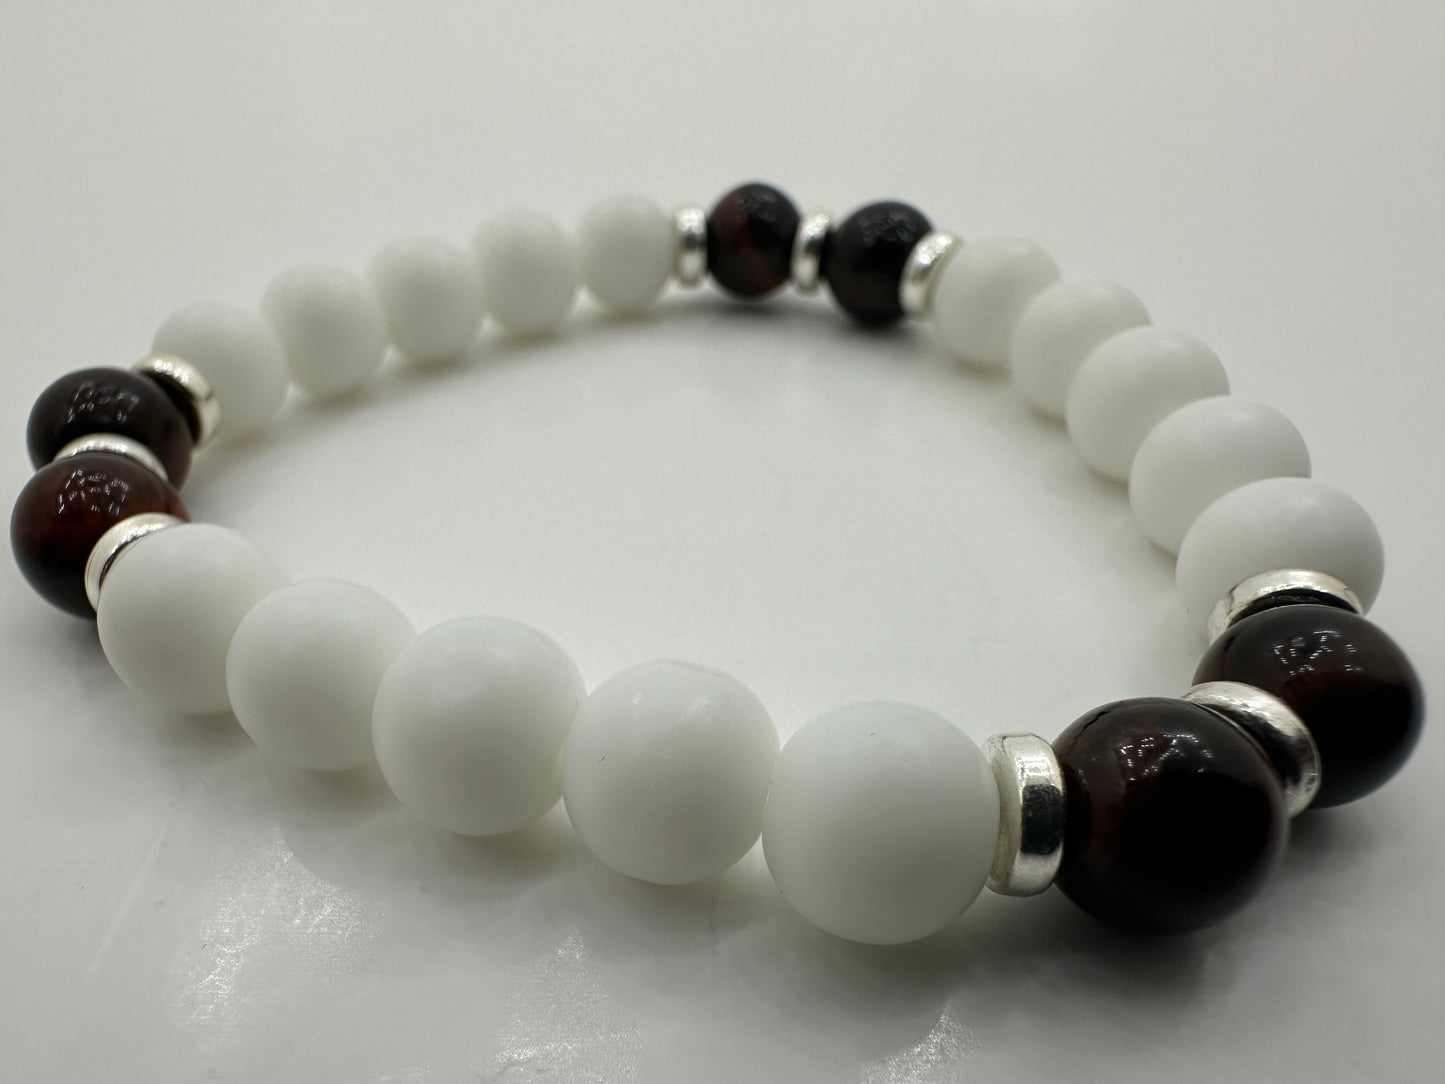 White Agate and Red Tiger’s Eye Gemstone Bracelet Size 7in.